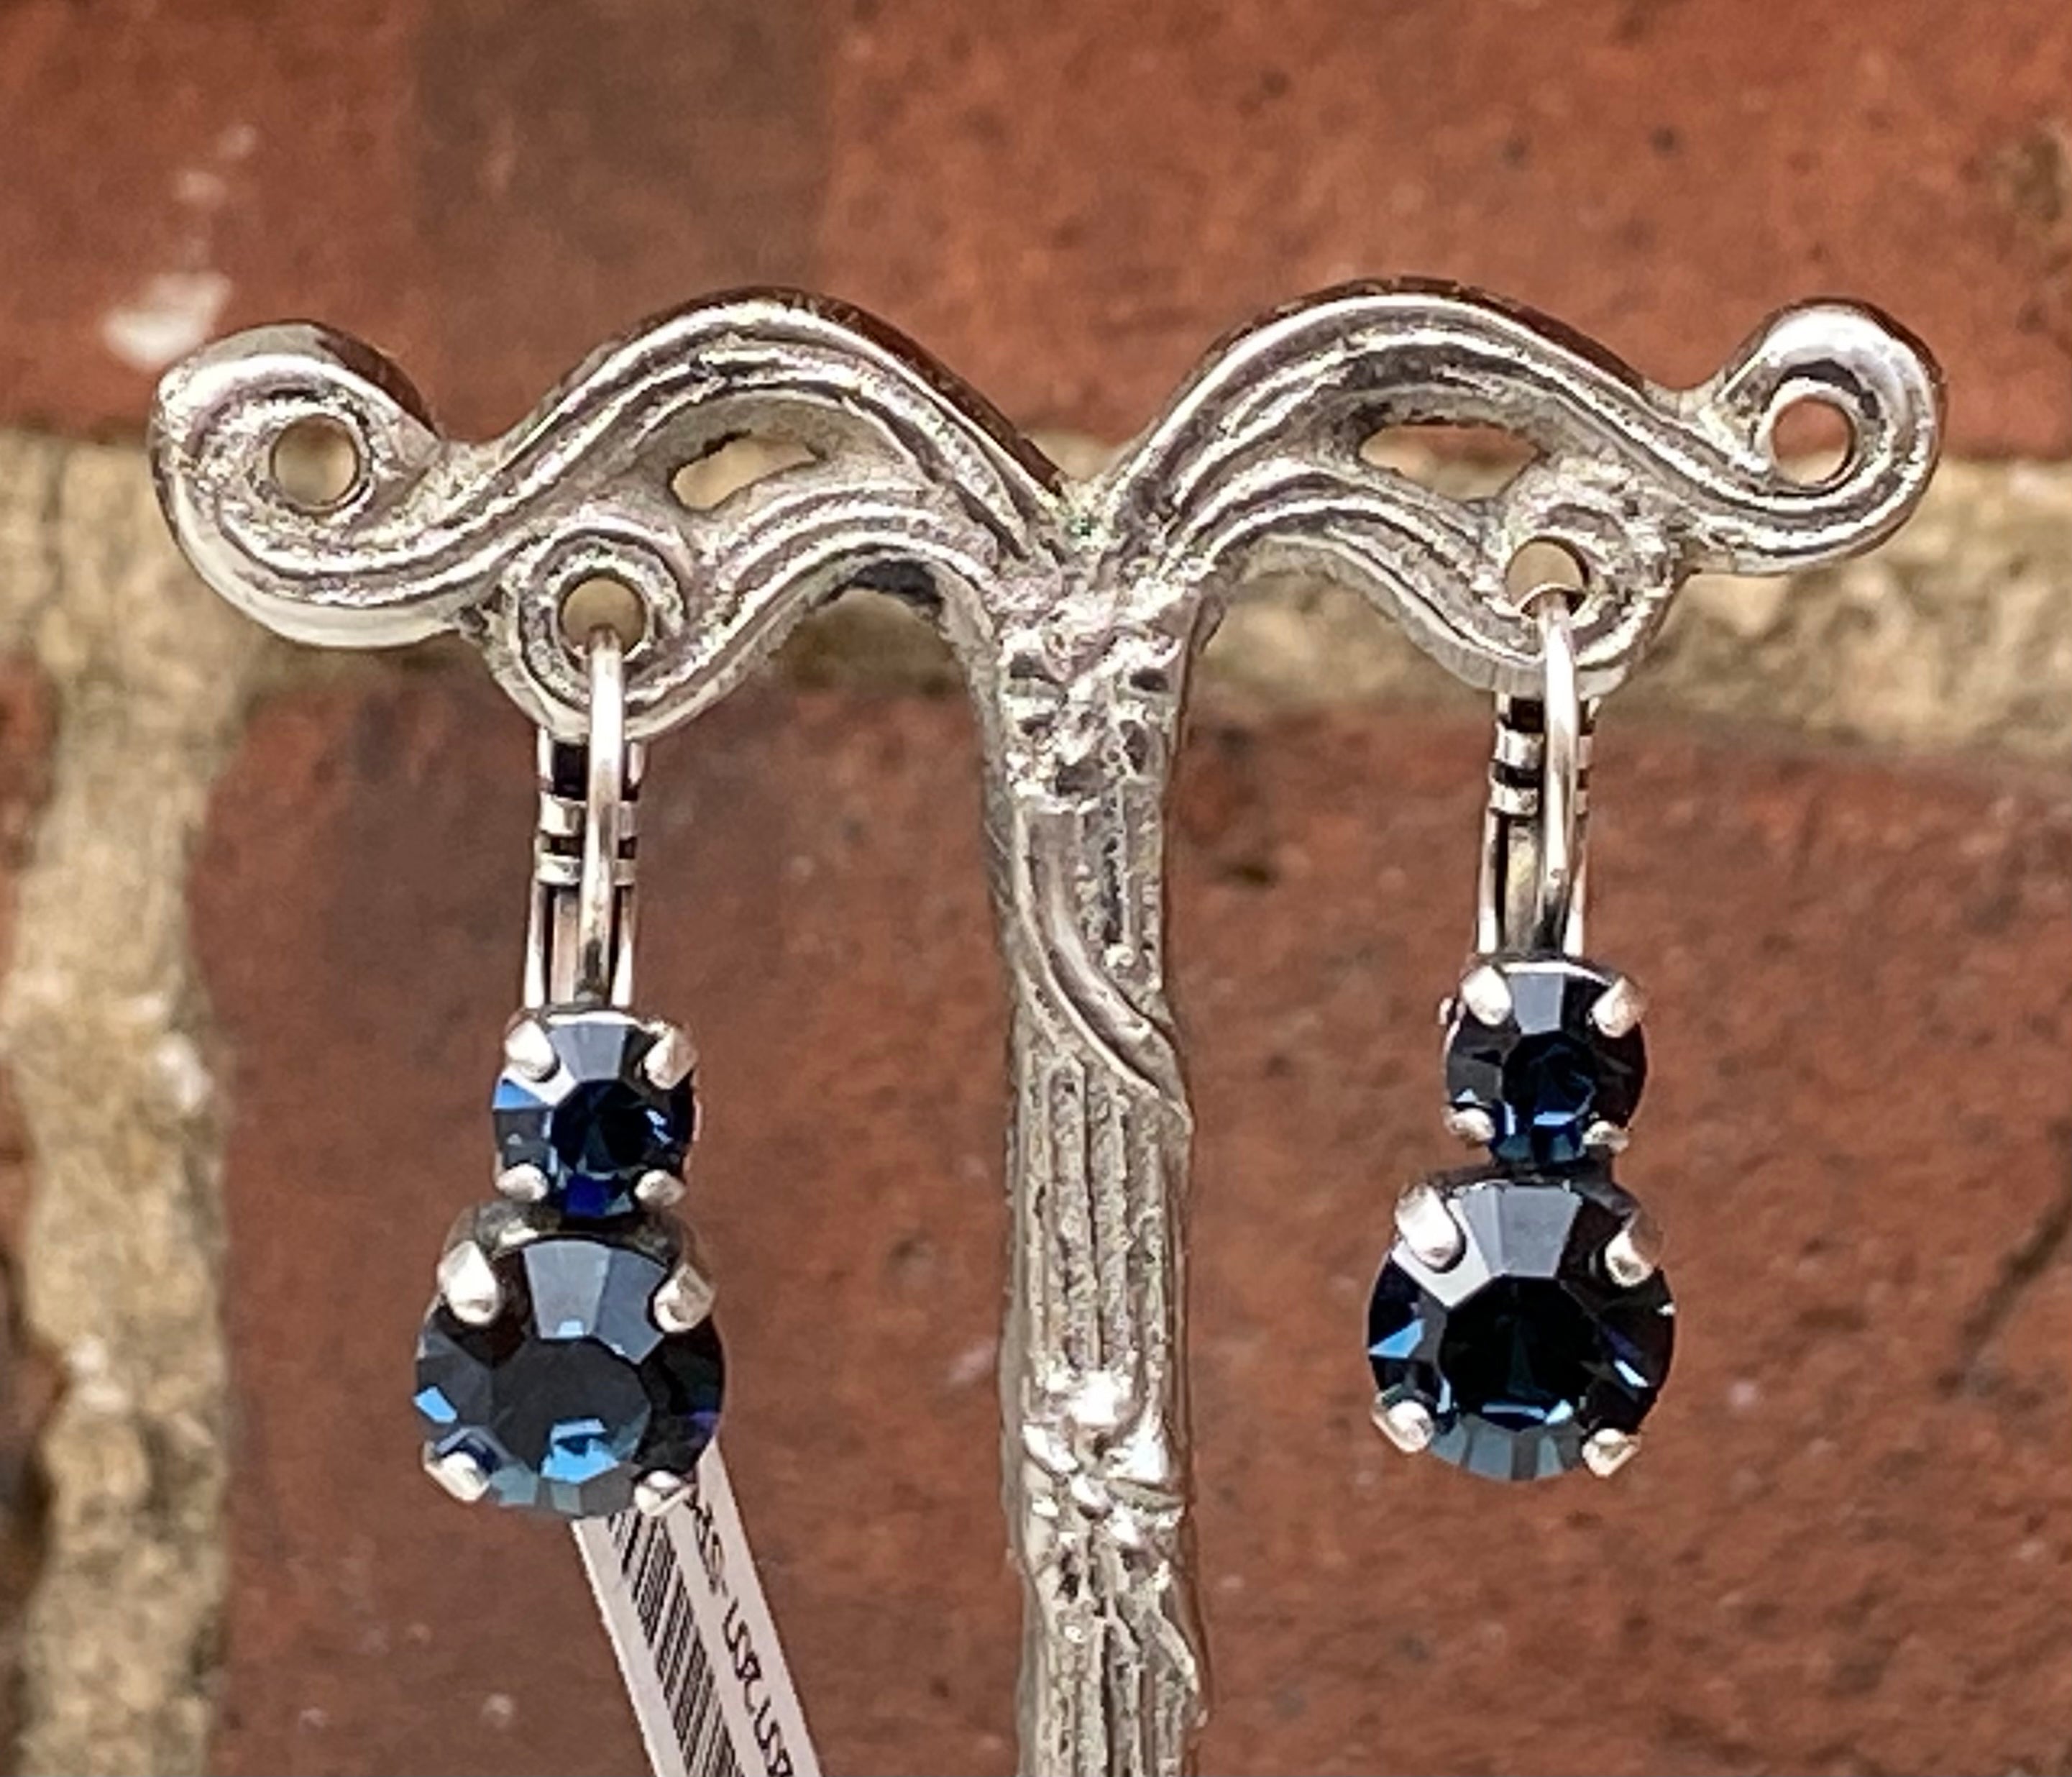 Mariana Antique Silver Must-Have Double Stone Crystal Leverback Earrings in “Montana Blue”